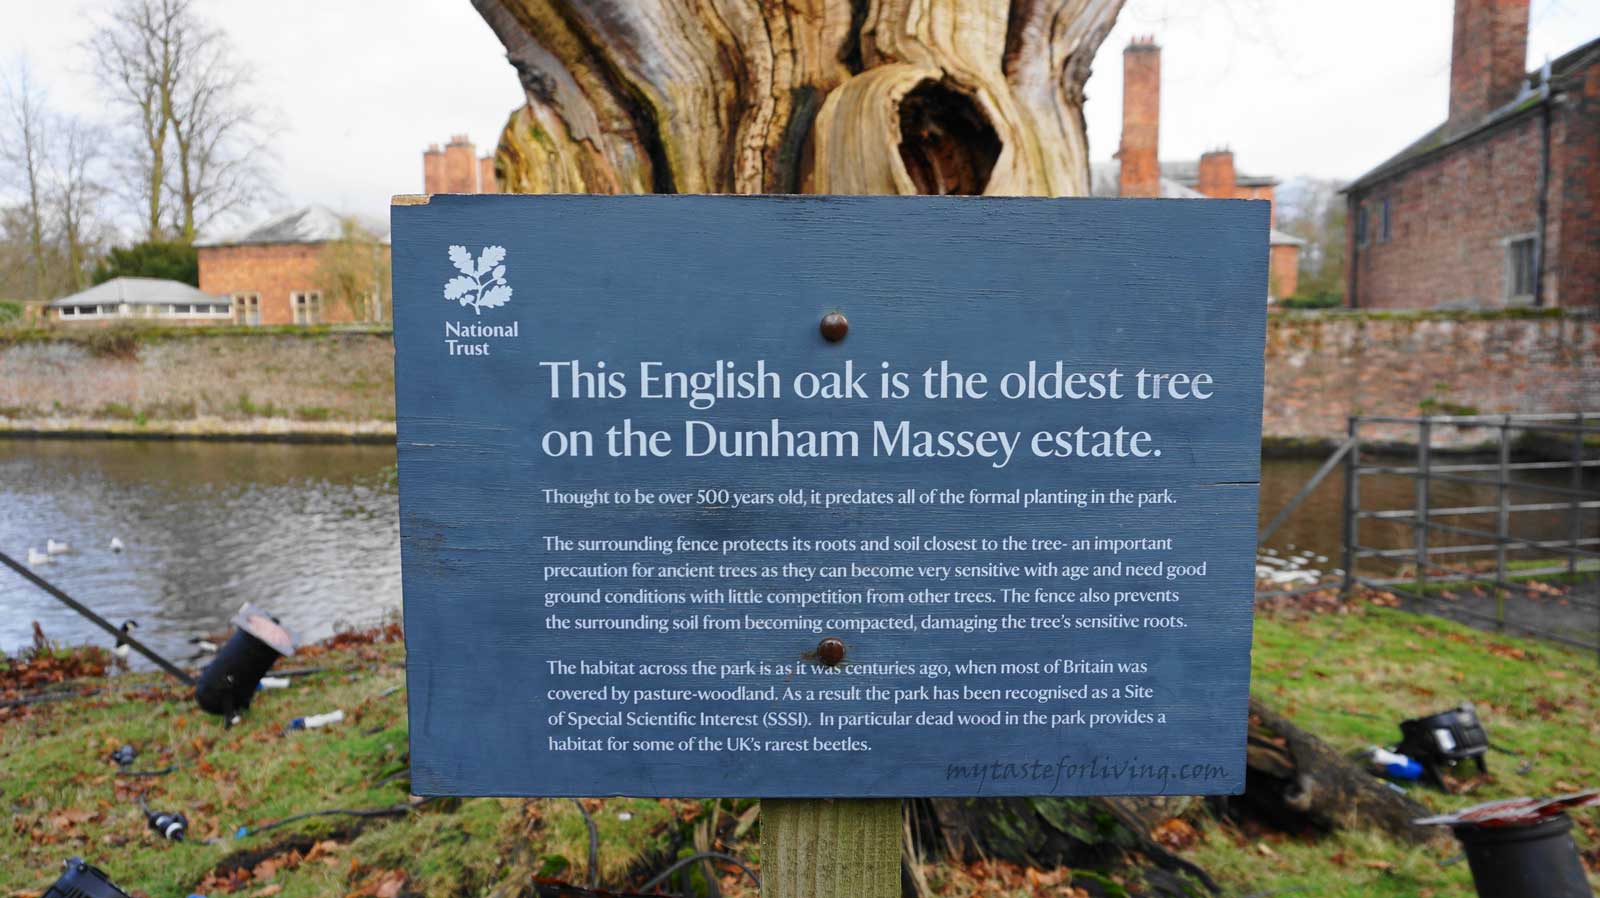 Duhnam Massey  is located in the north-west of England, near the city of Manchester, and is owned by the National Trust. 